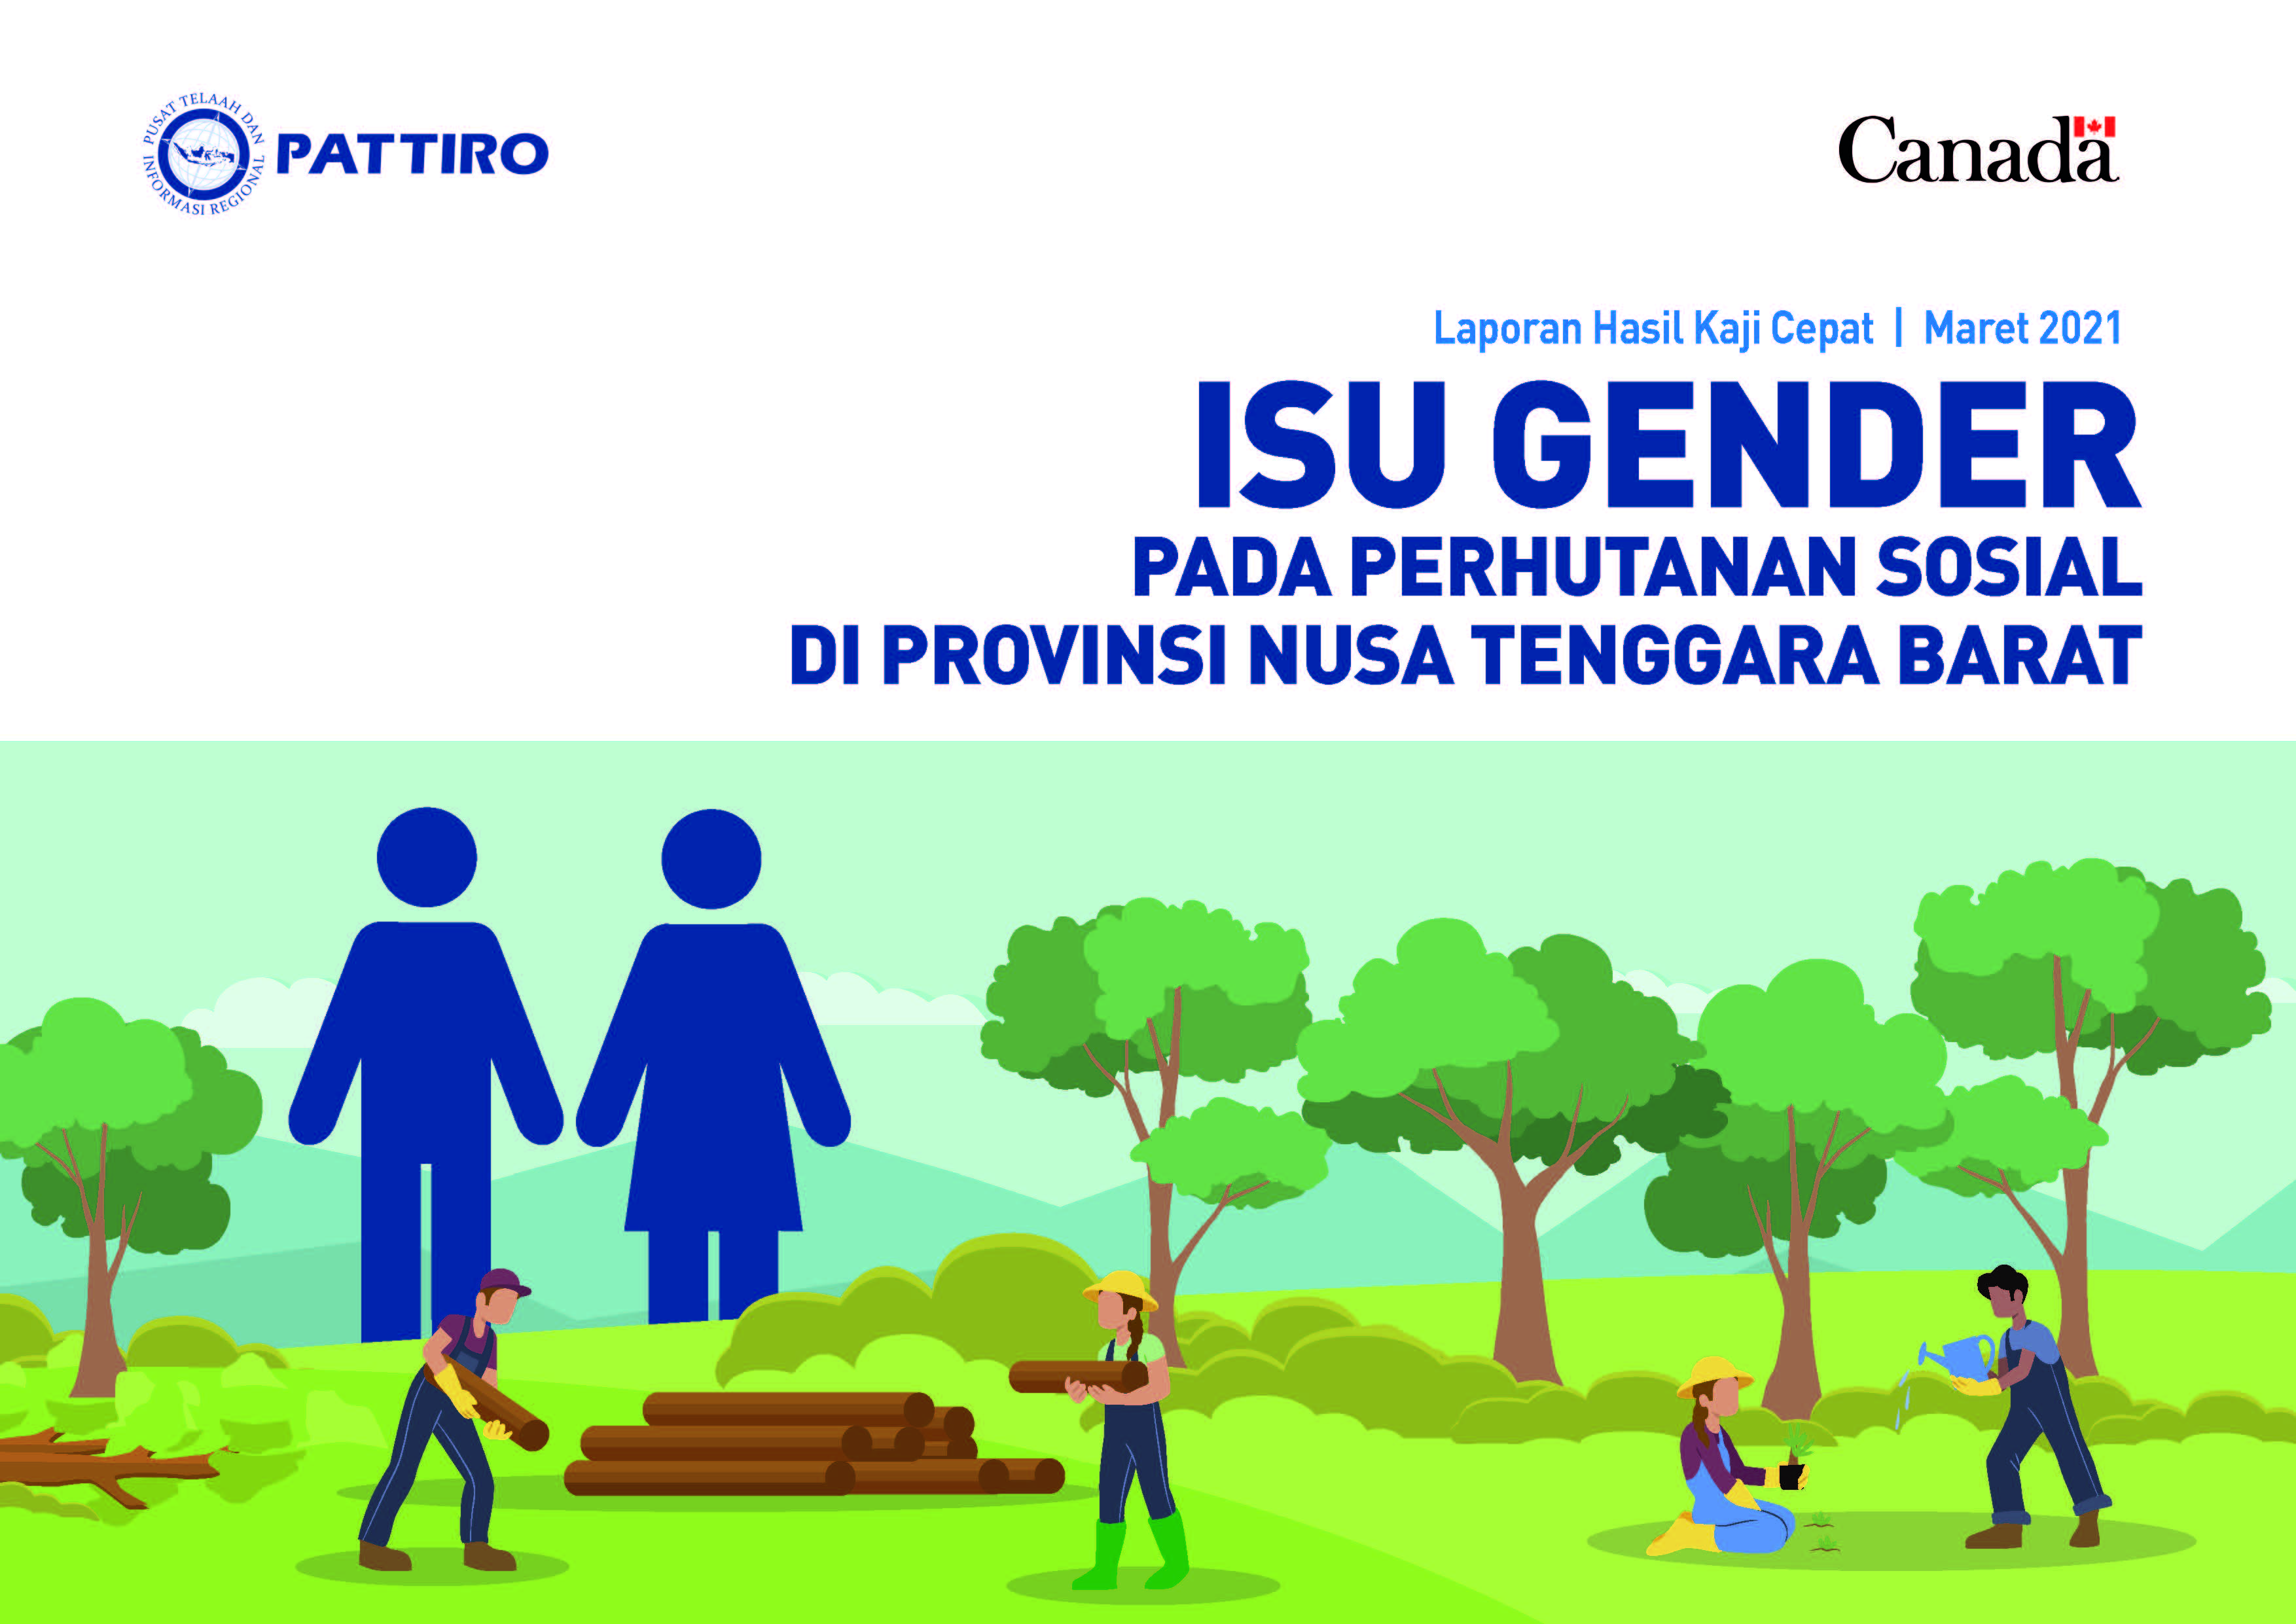 Rapid Study Report | March 2021: Gender Issues in Social Forestry in West Nusa Tenggara Province